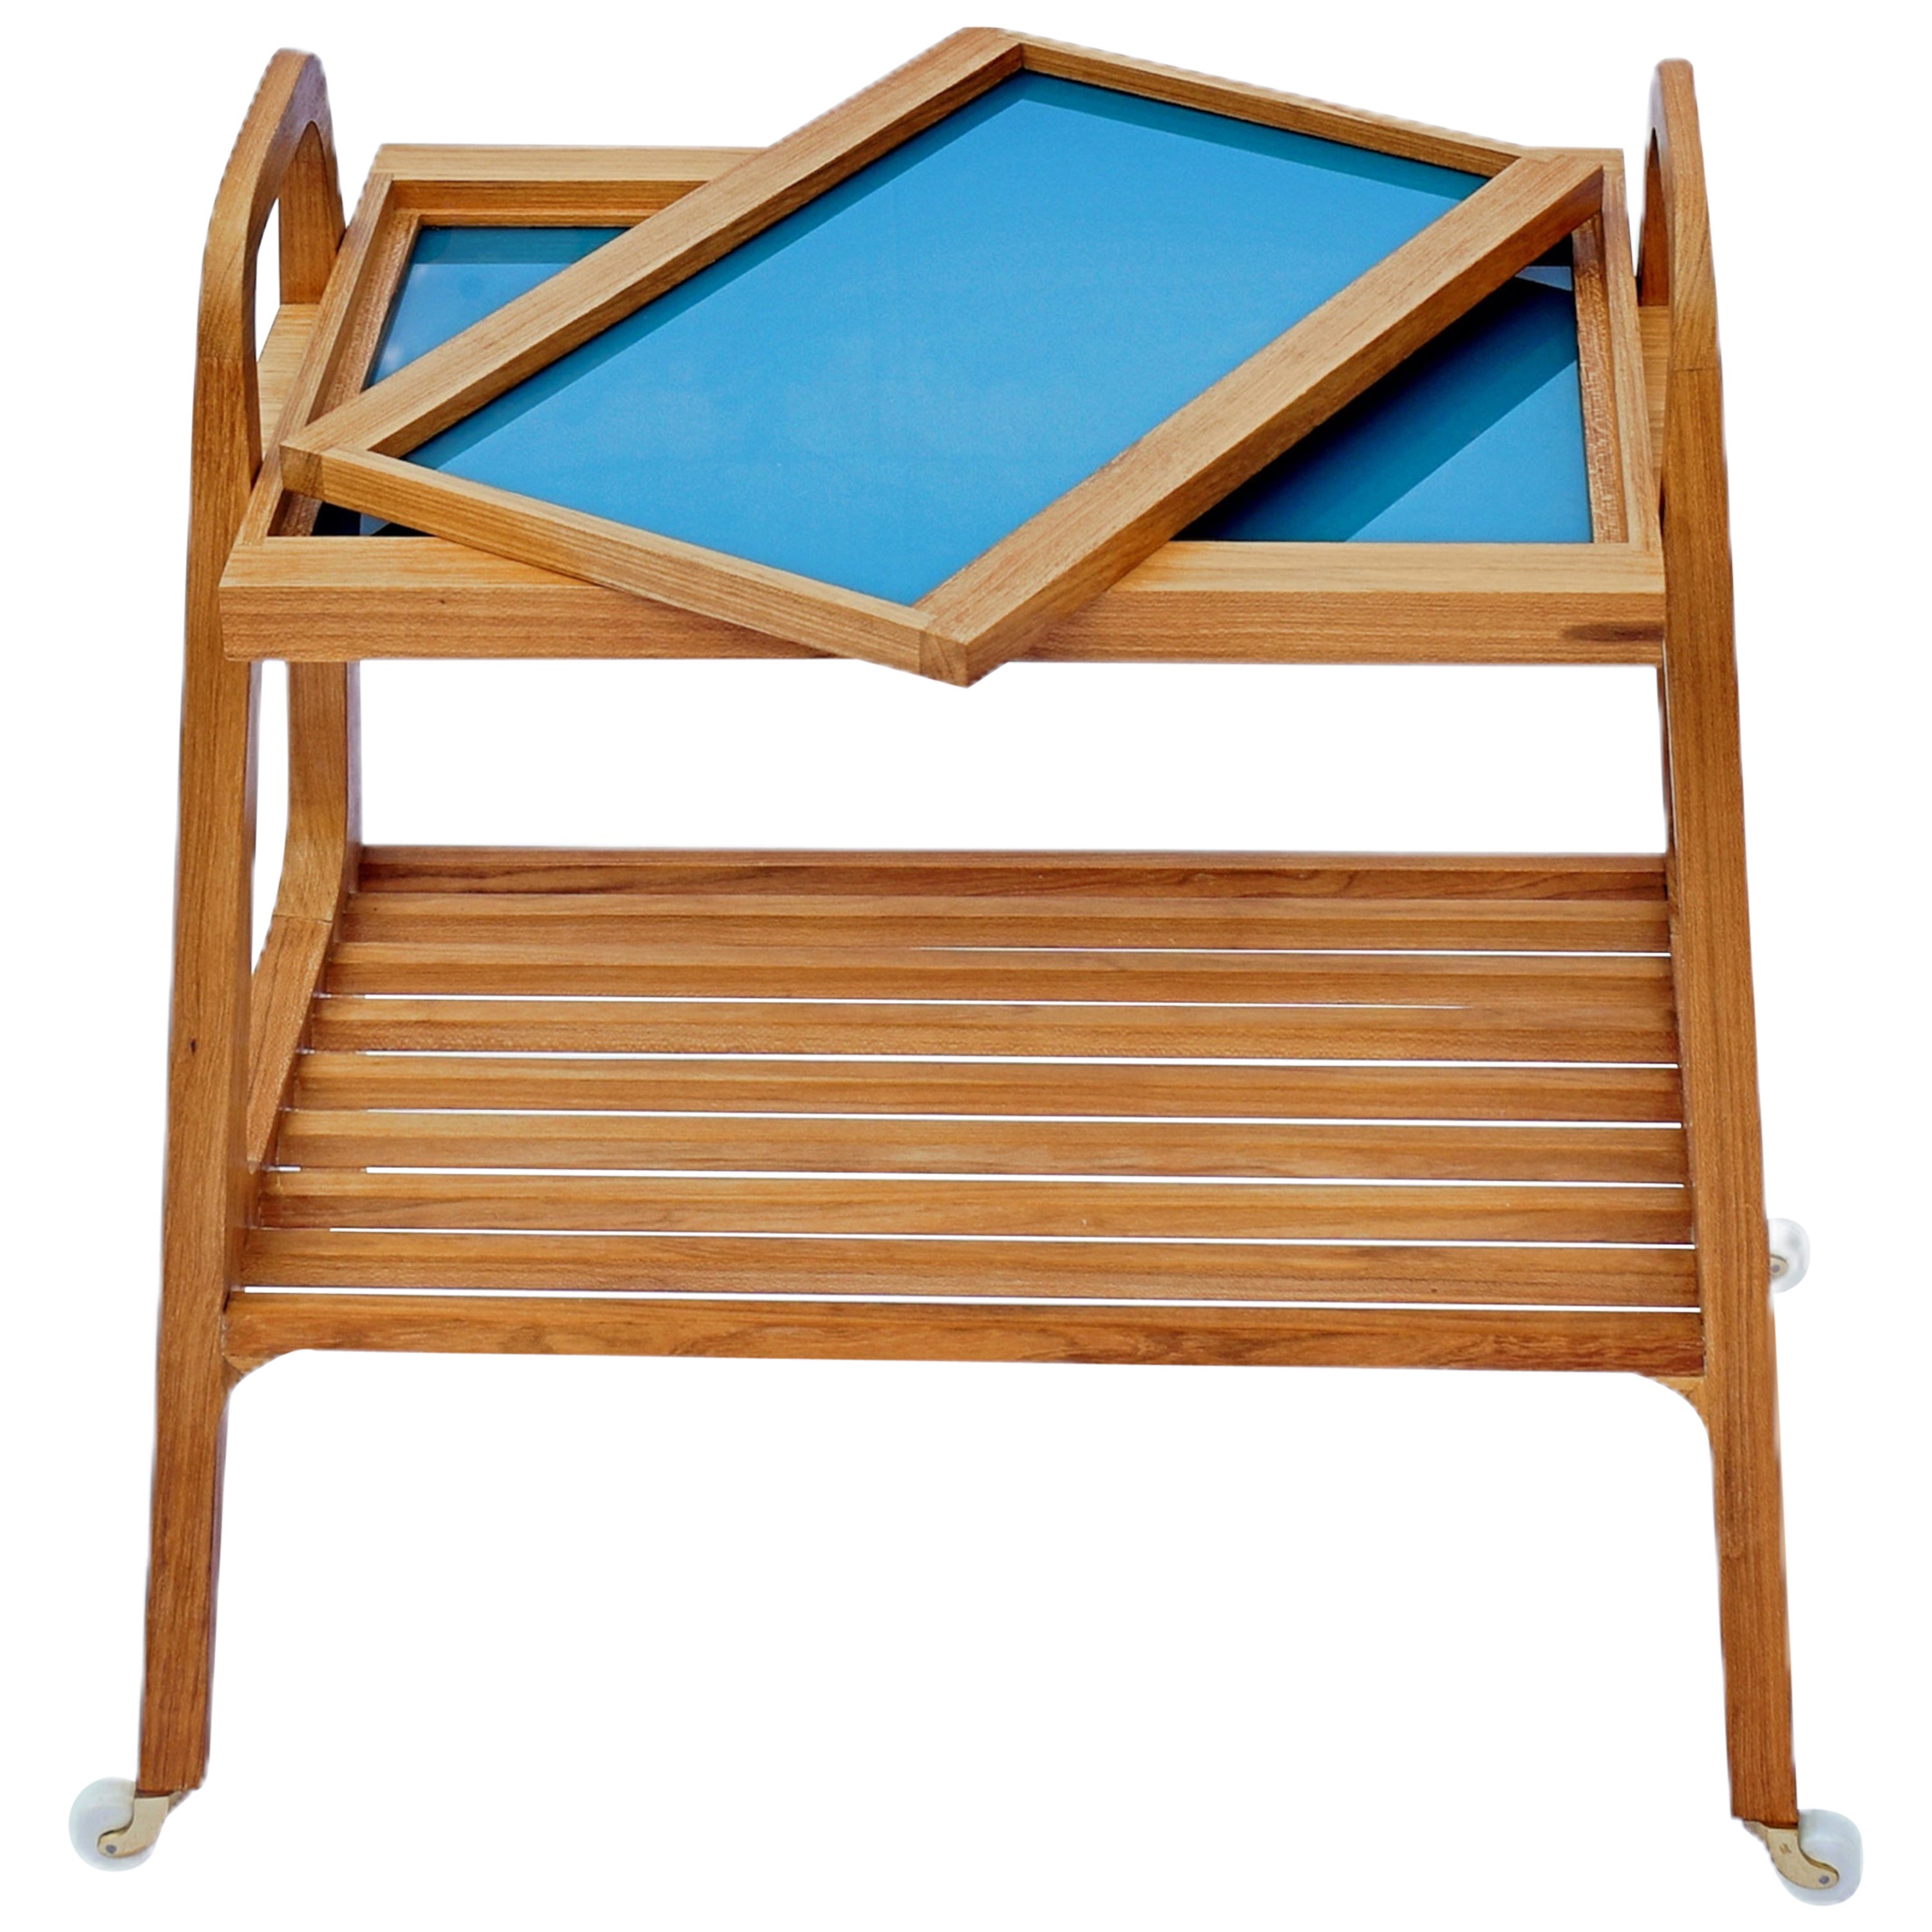 SOFO Tea Trolley in Freijo Wood with Blue Glass Tray